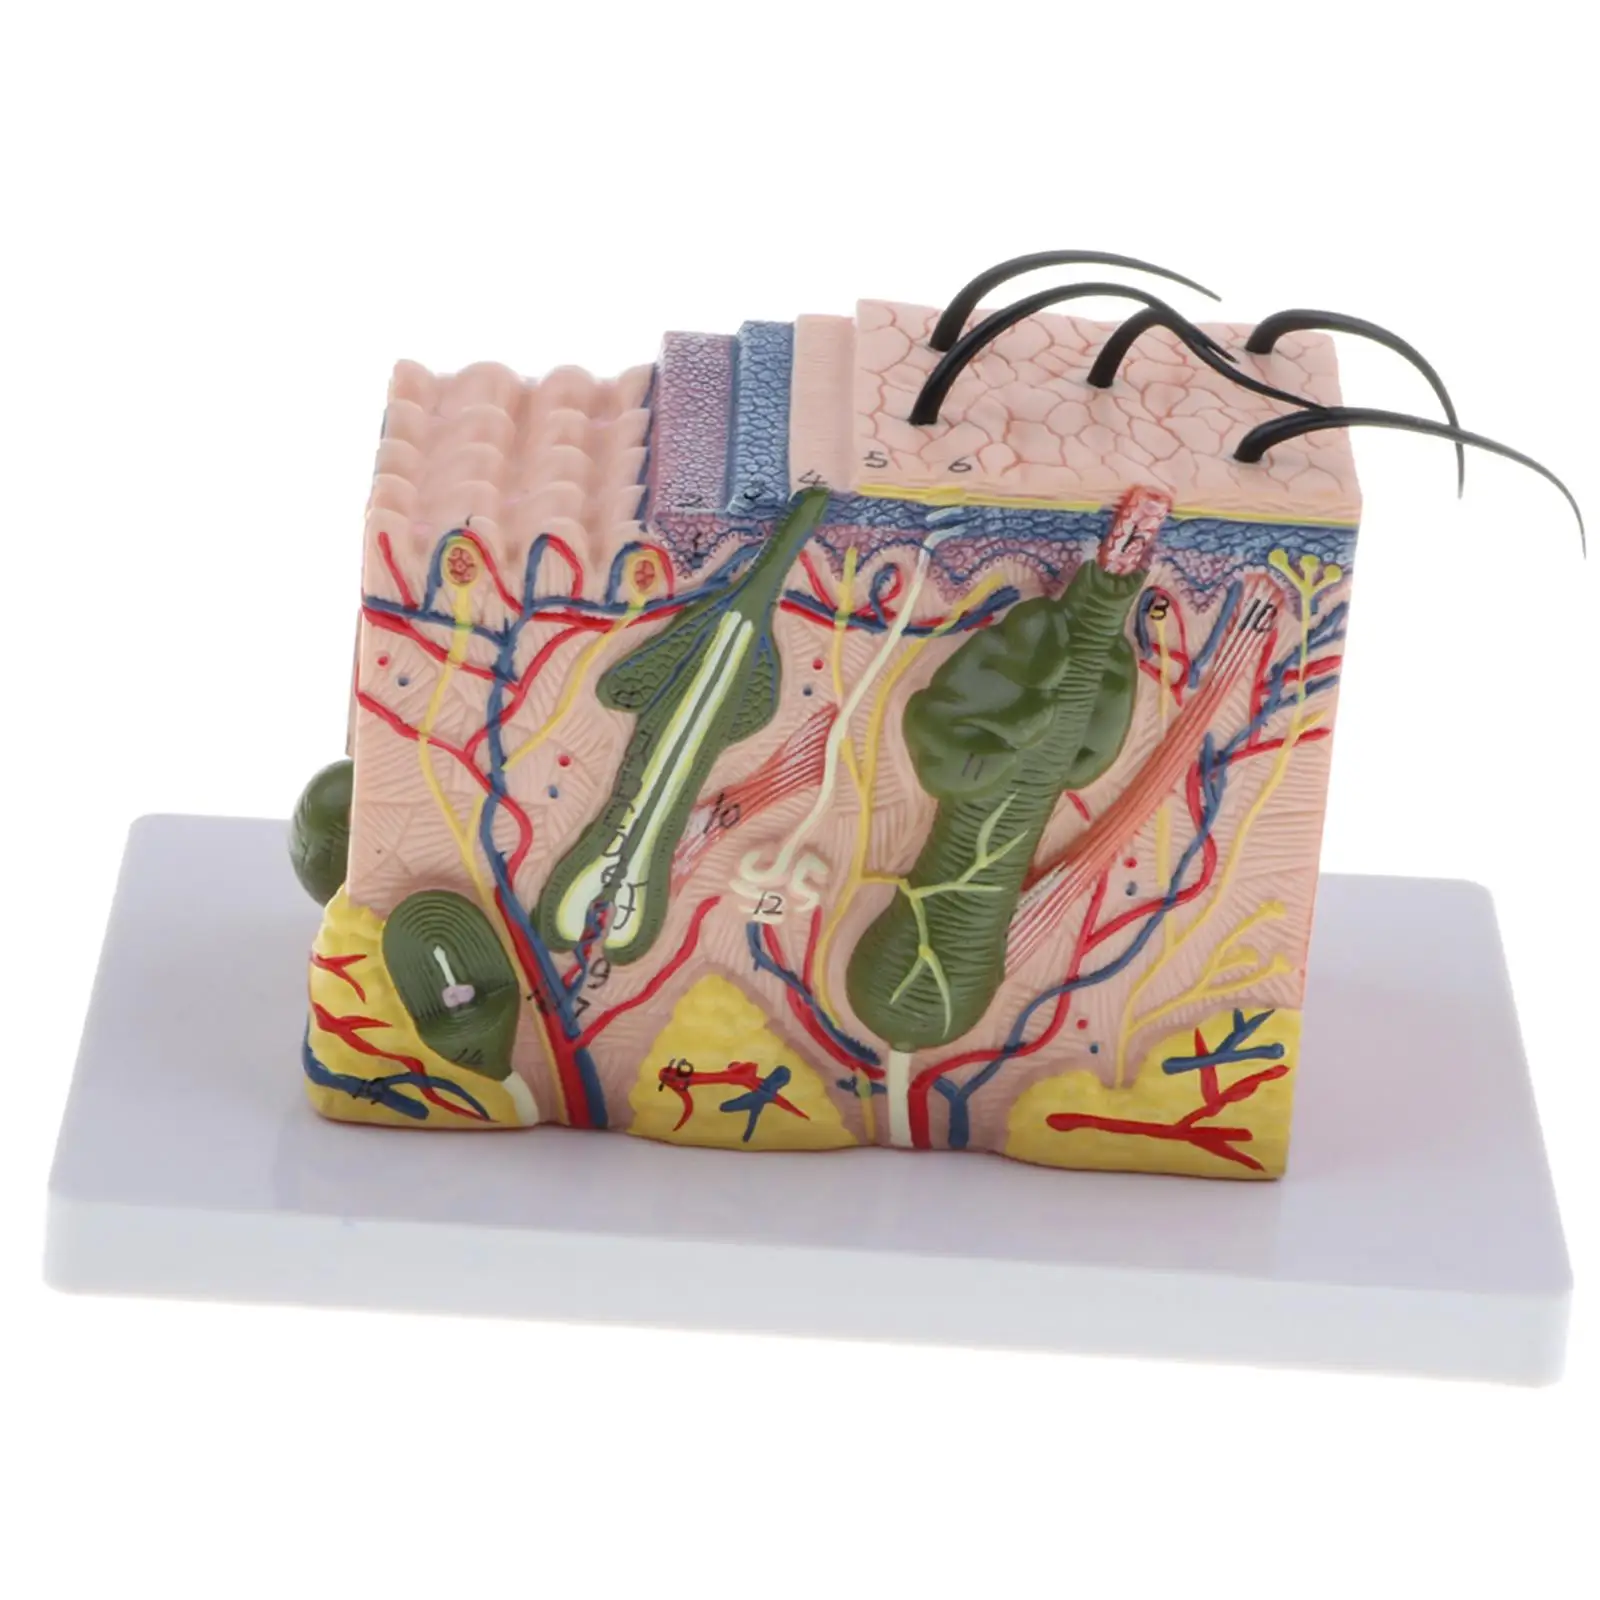 Magnify 35X Human Skin Texture Subcutaneous Tissue Dissection Model Biology Teaching Display